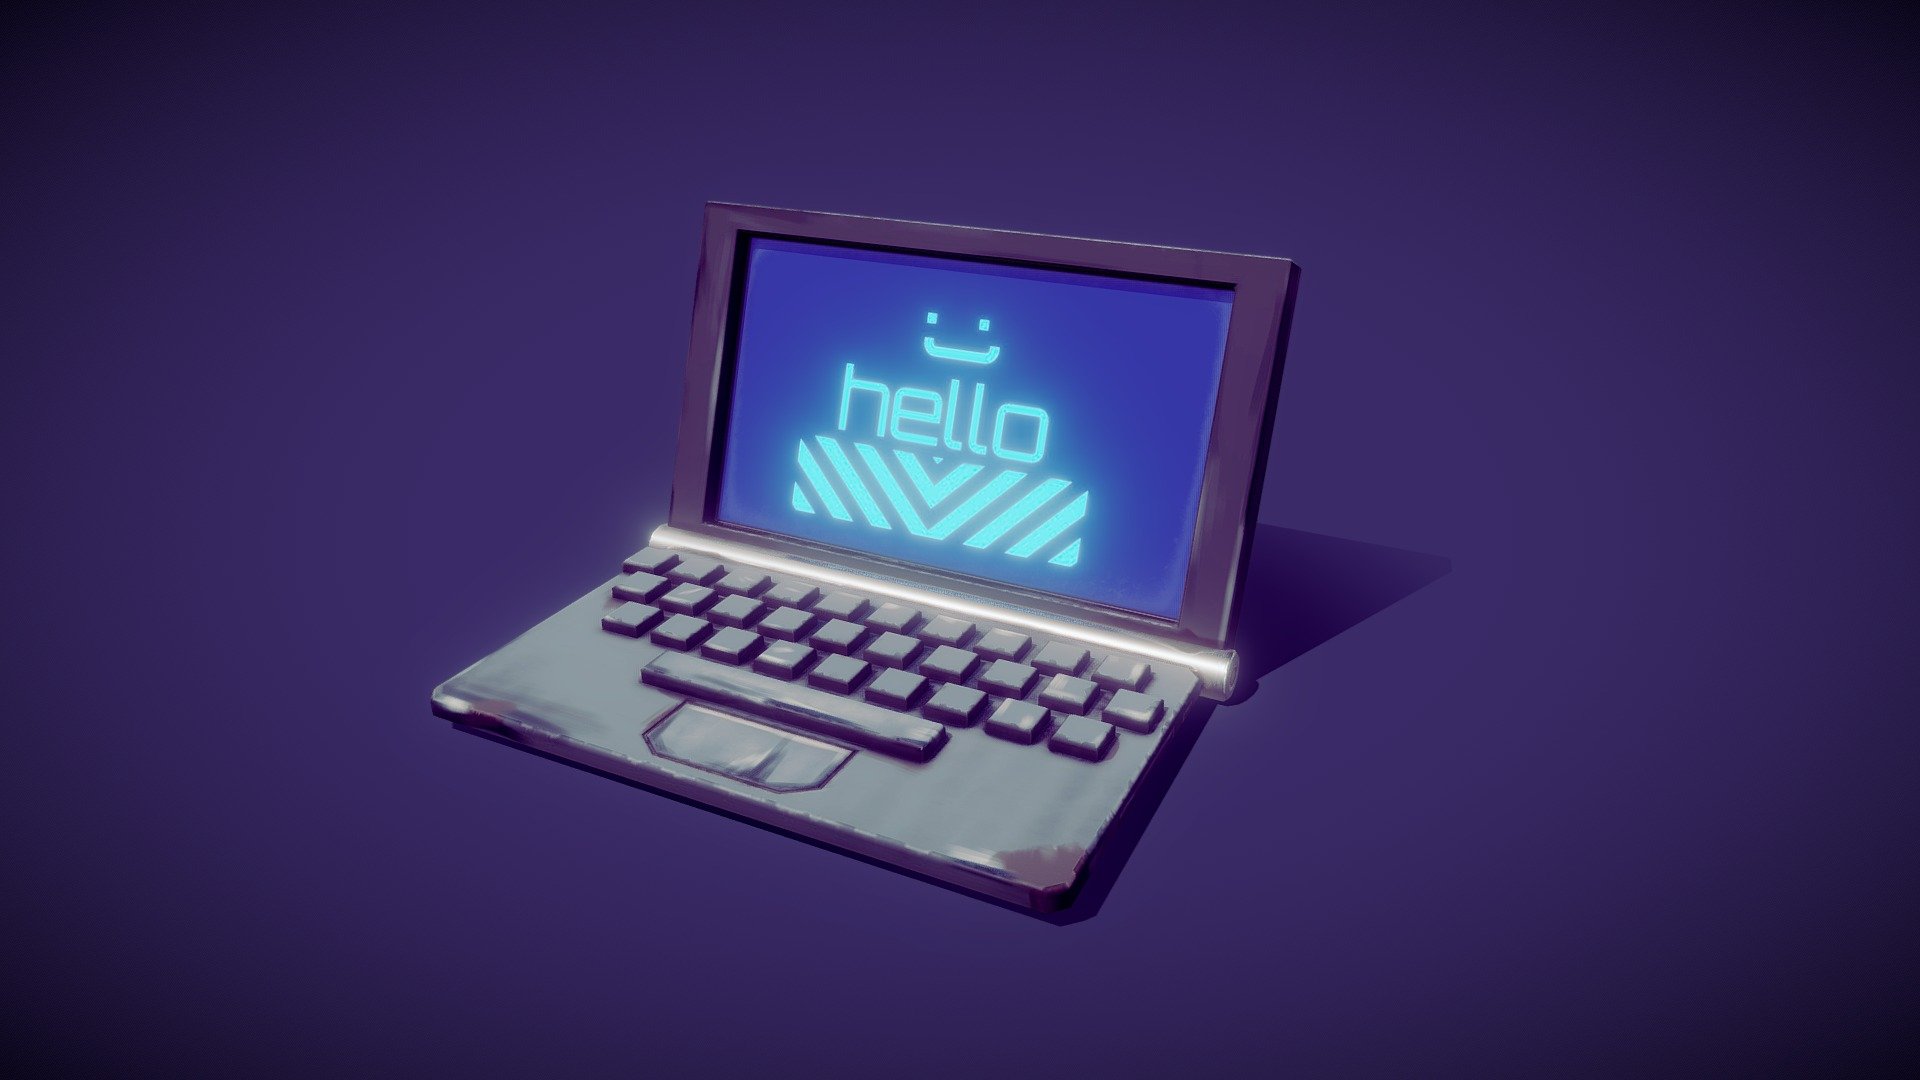 sci - fi laptop
textyre = 2048 x 2048 - Laptop - 3D model by Cycle (@gosteroip) 3d model